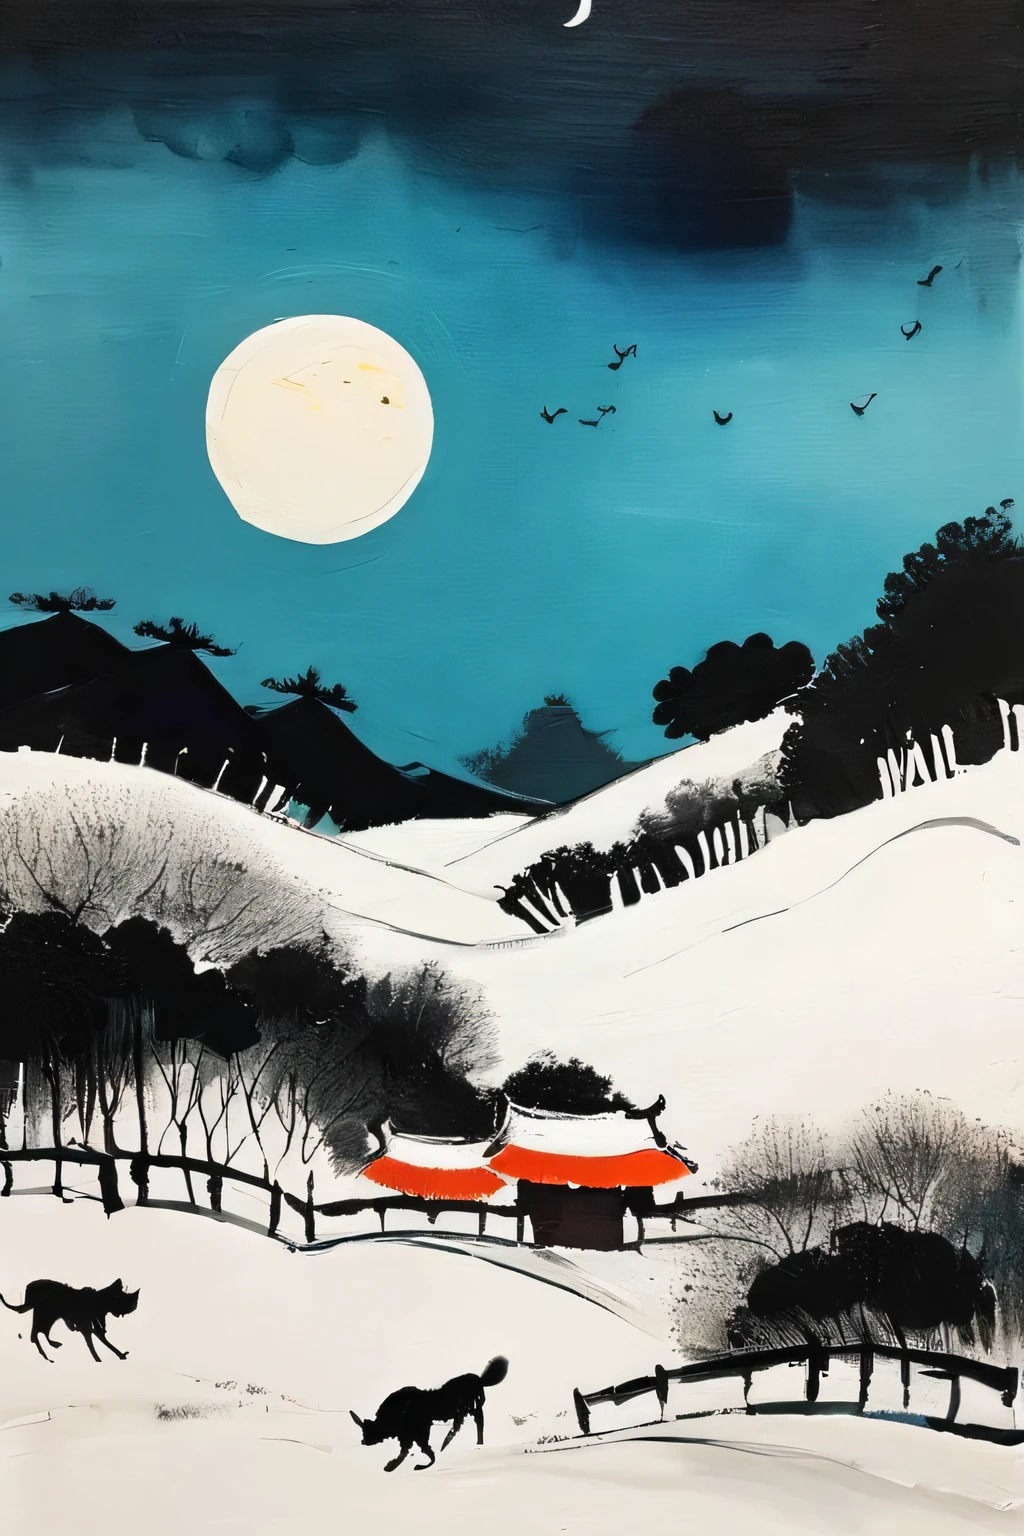 Wu Guan Zhongfeng Landscape Painting,moon and wolf,van gogh&#39;Impact of,モーリス・ユトリロImpact of,rich in emotion,abstract,Fusion of Chinese art and Western art,Simple and beautiful,Make white and black the main colors,ink painting elements,watercolor elements,Computed configuration,perfect composition,最高masterpiece,masterpiece,highest quality,bold touch,A picture that moves the viewer&#39;s heart,High rating,Awards